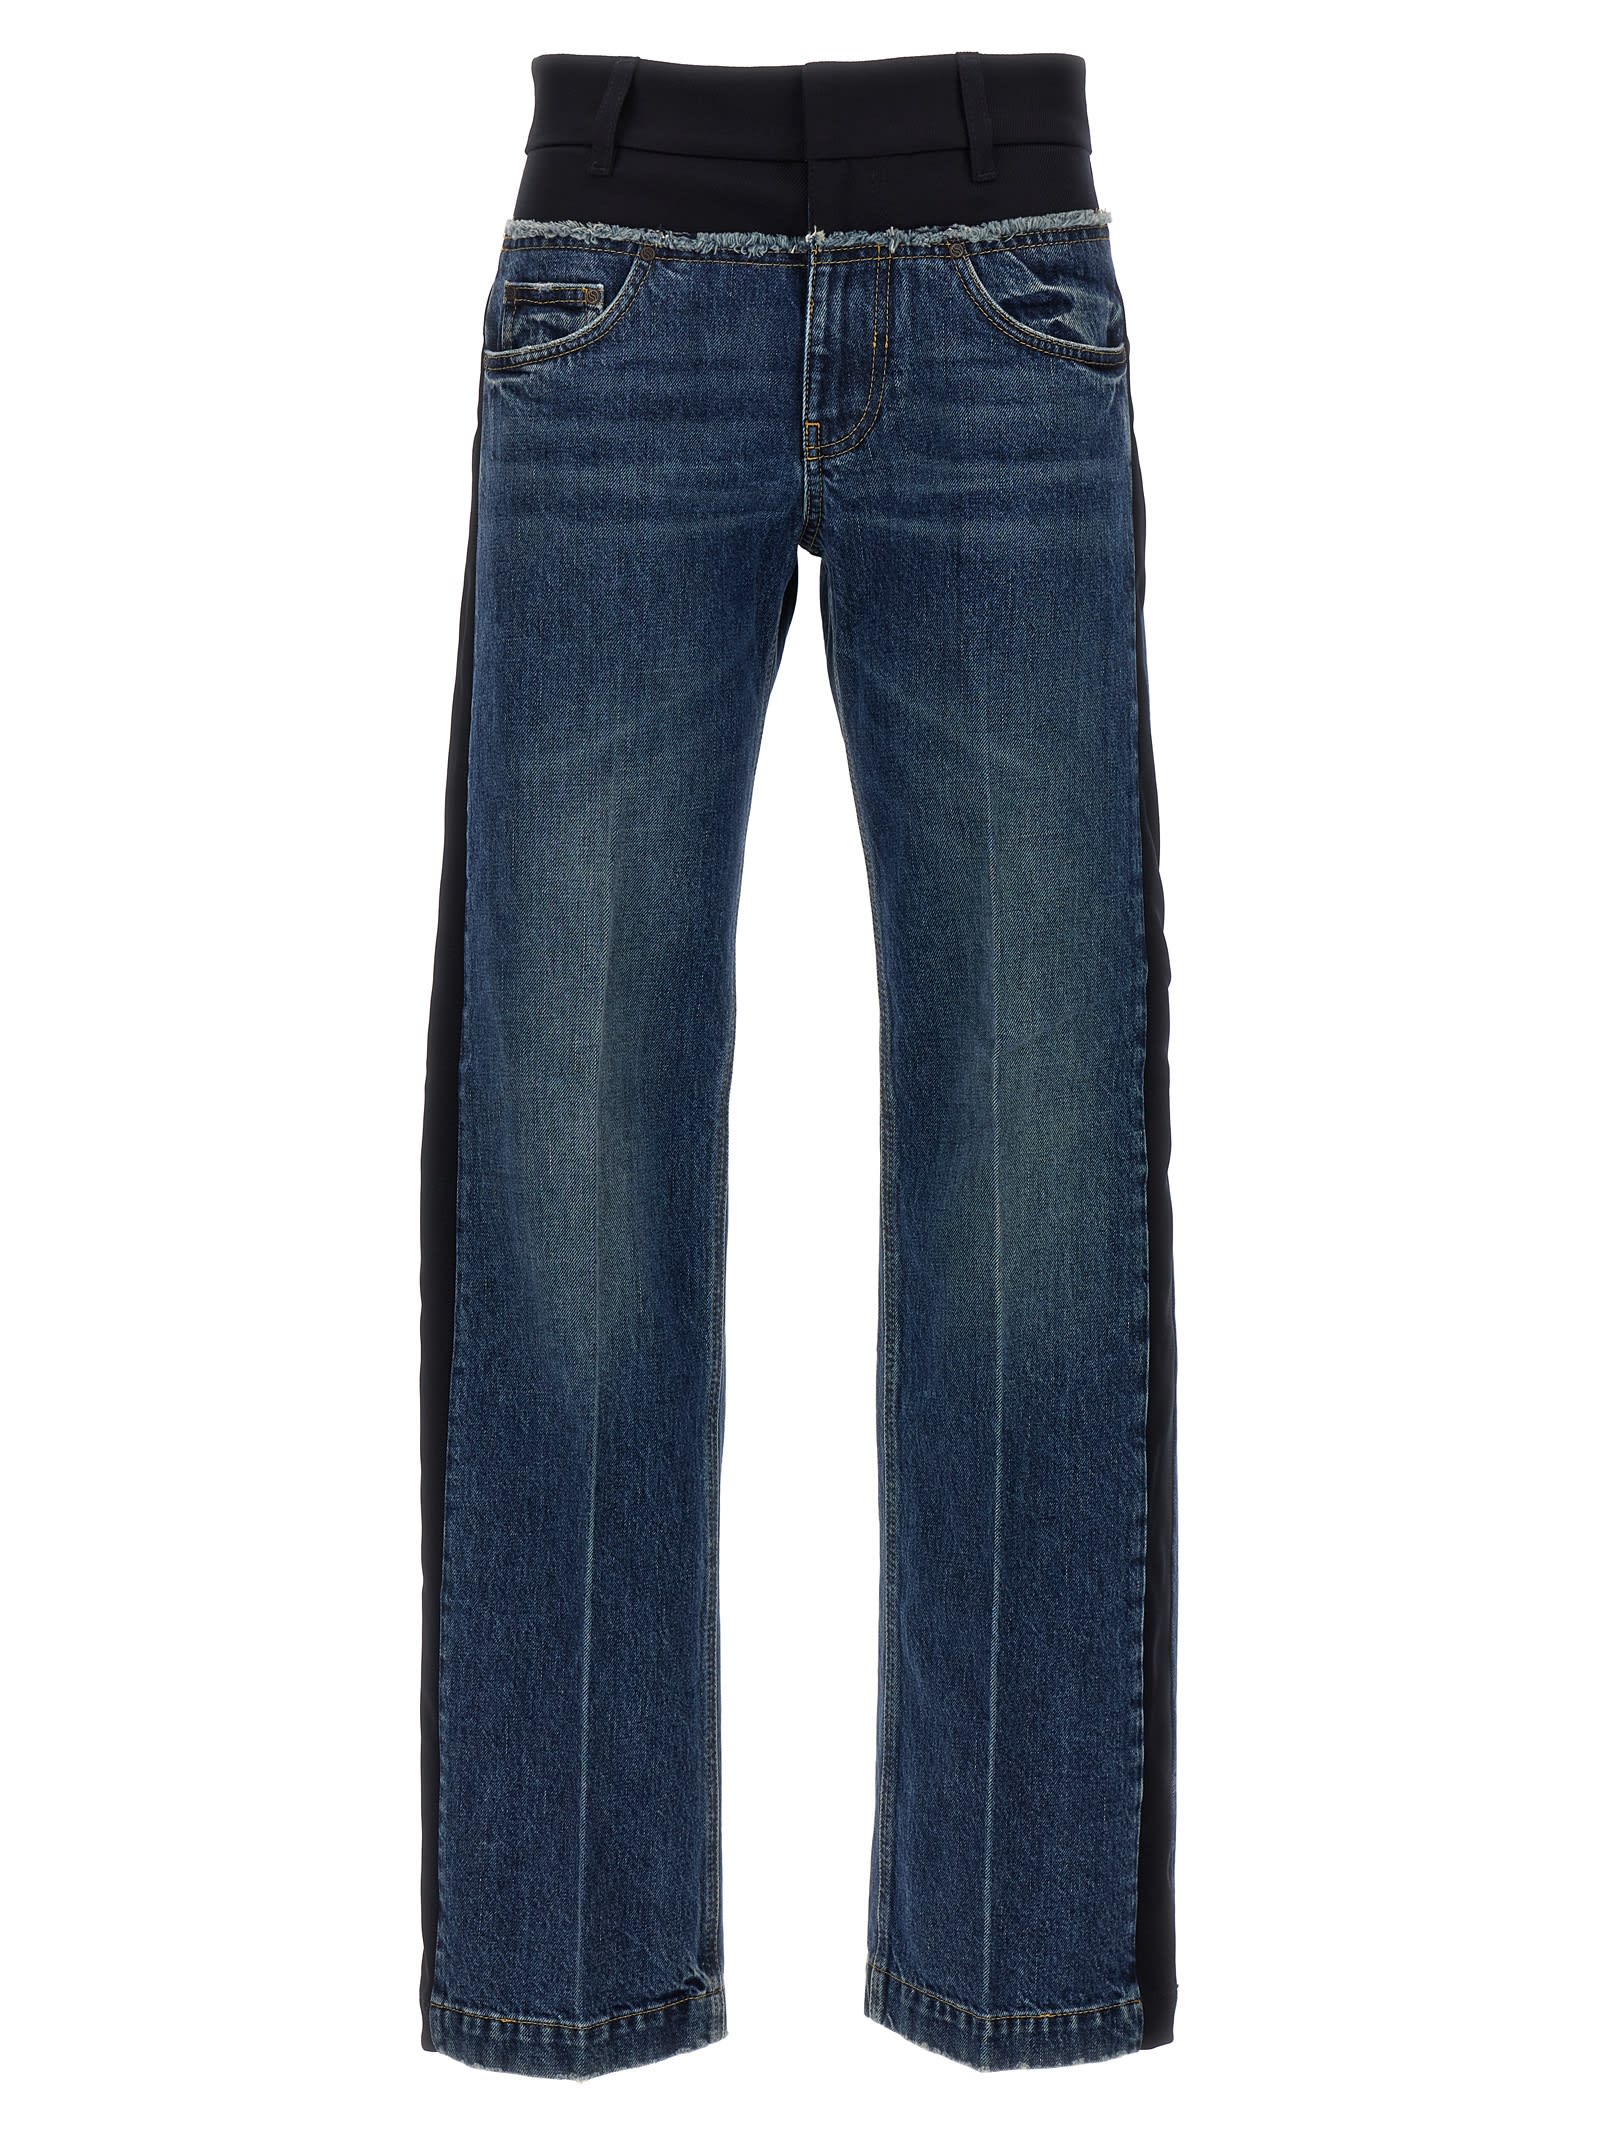 STELLA MCCARTNEY TWO-MATERIAL JEANS